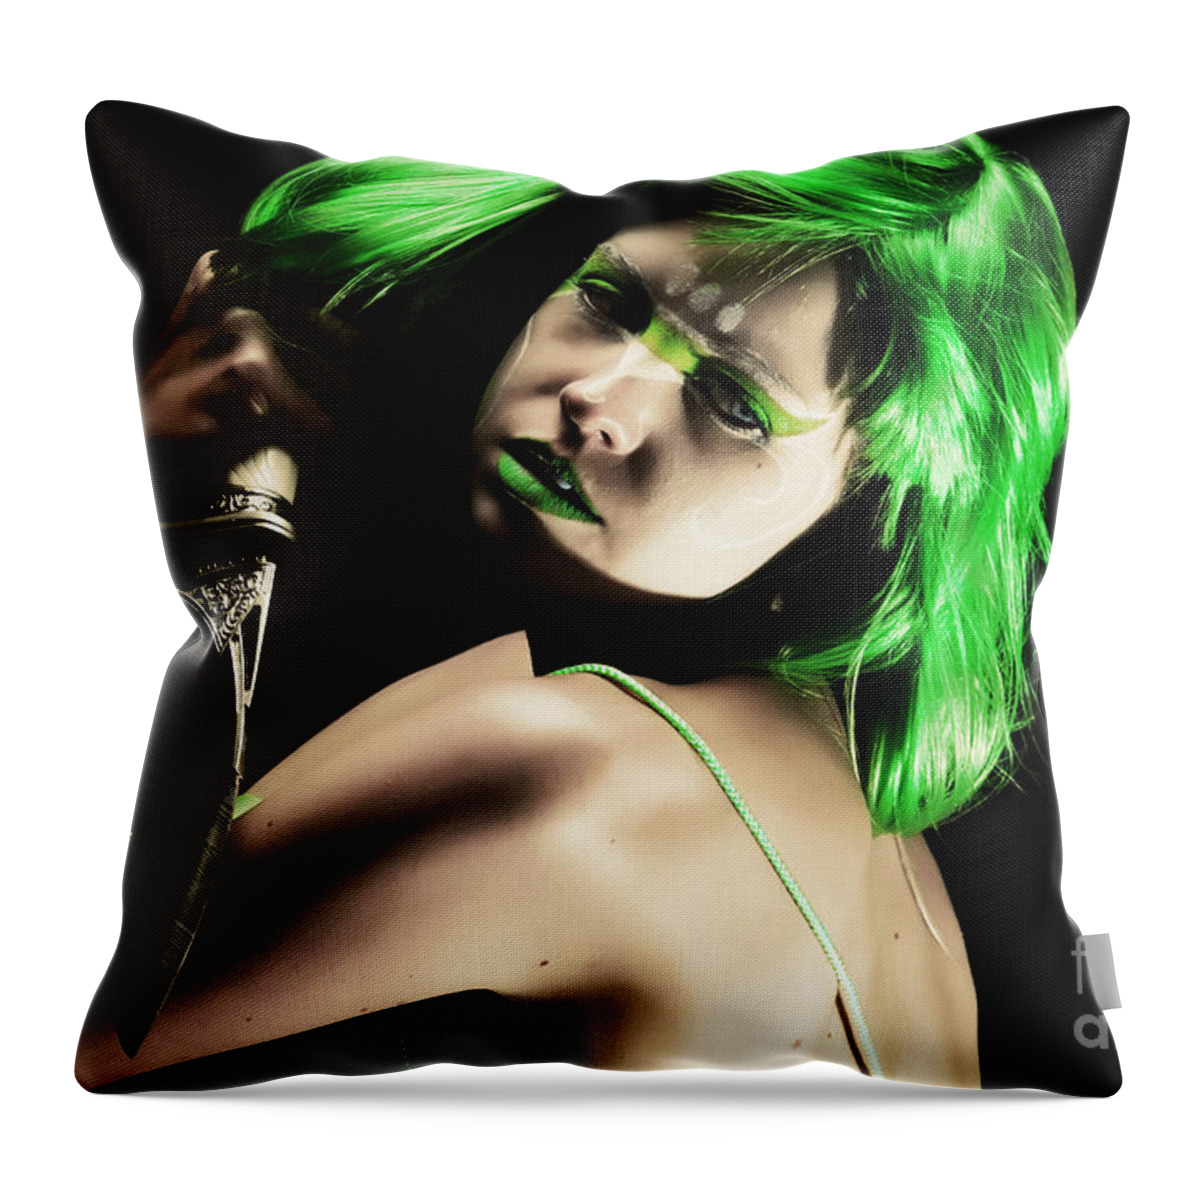 Artistic Throw Pillow featuring the photograph The Fight by Robert WK Clark